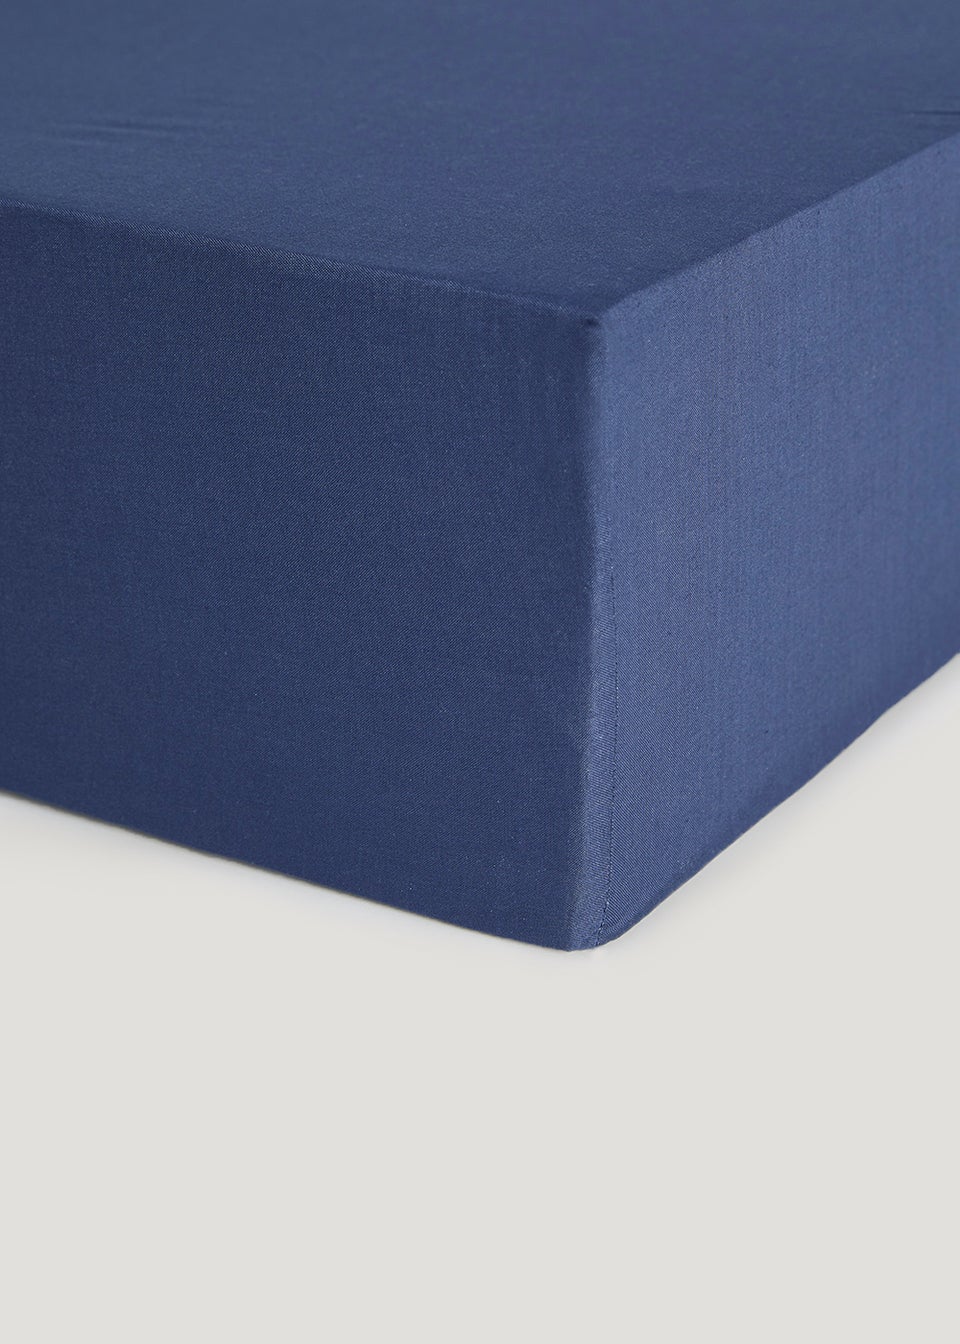 Navy Polycotton Fitted Bed Sheet (144 Thread Count)